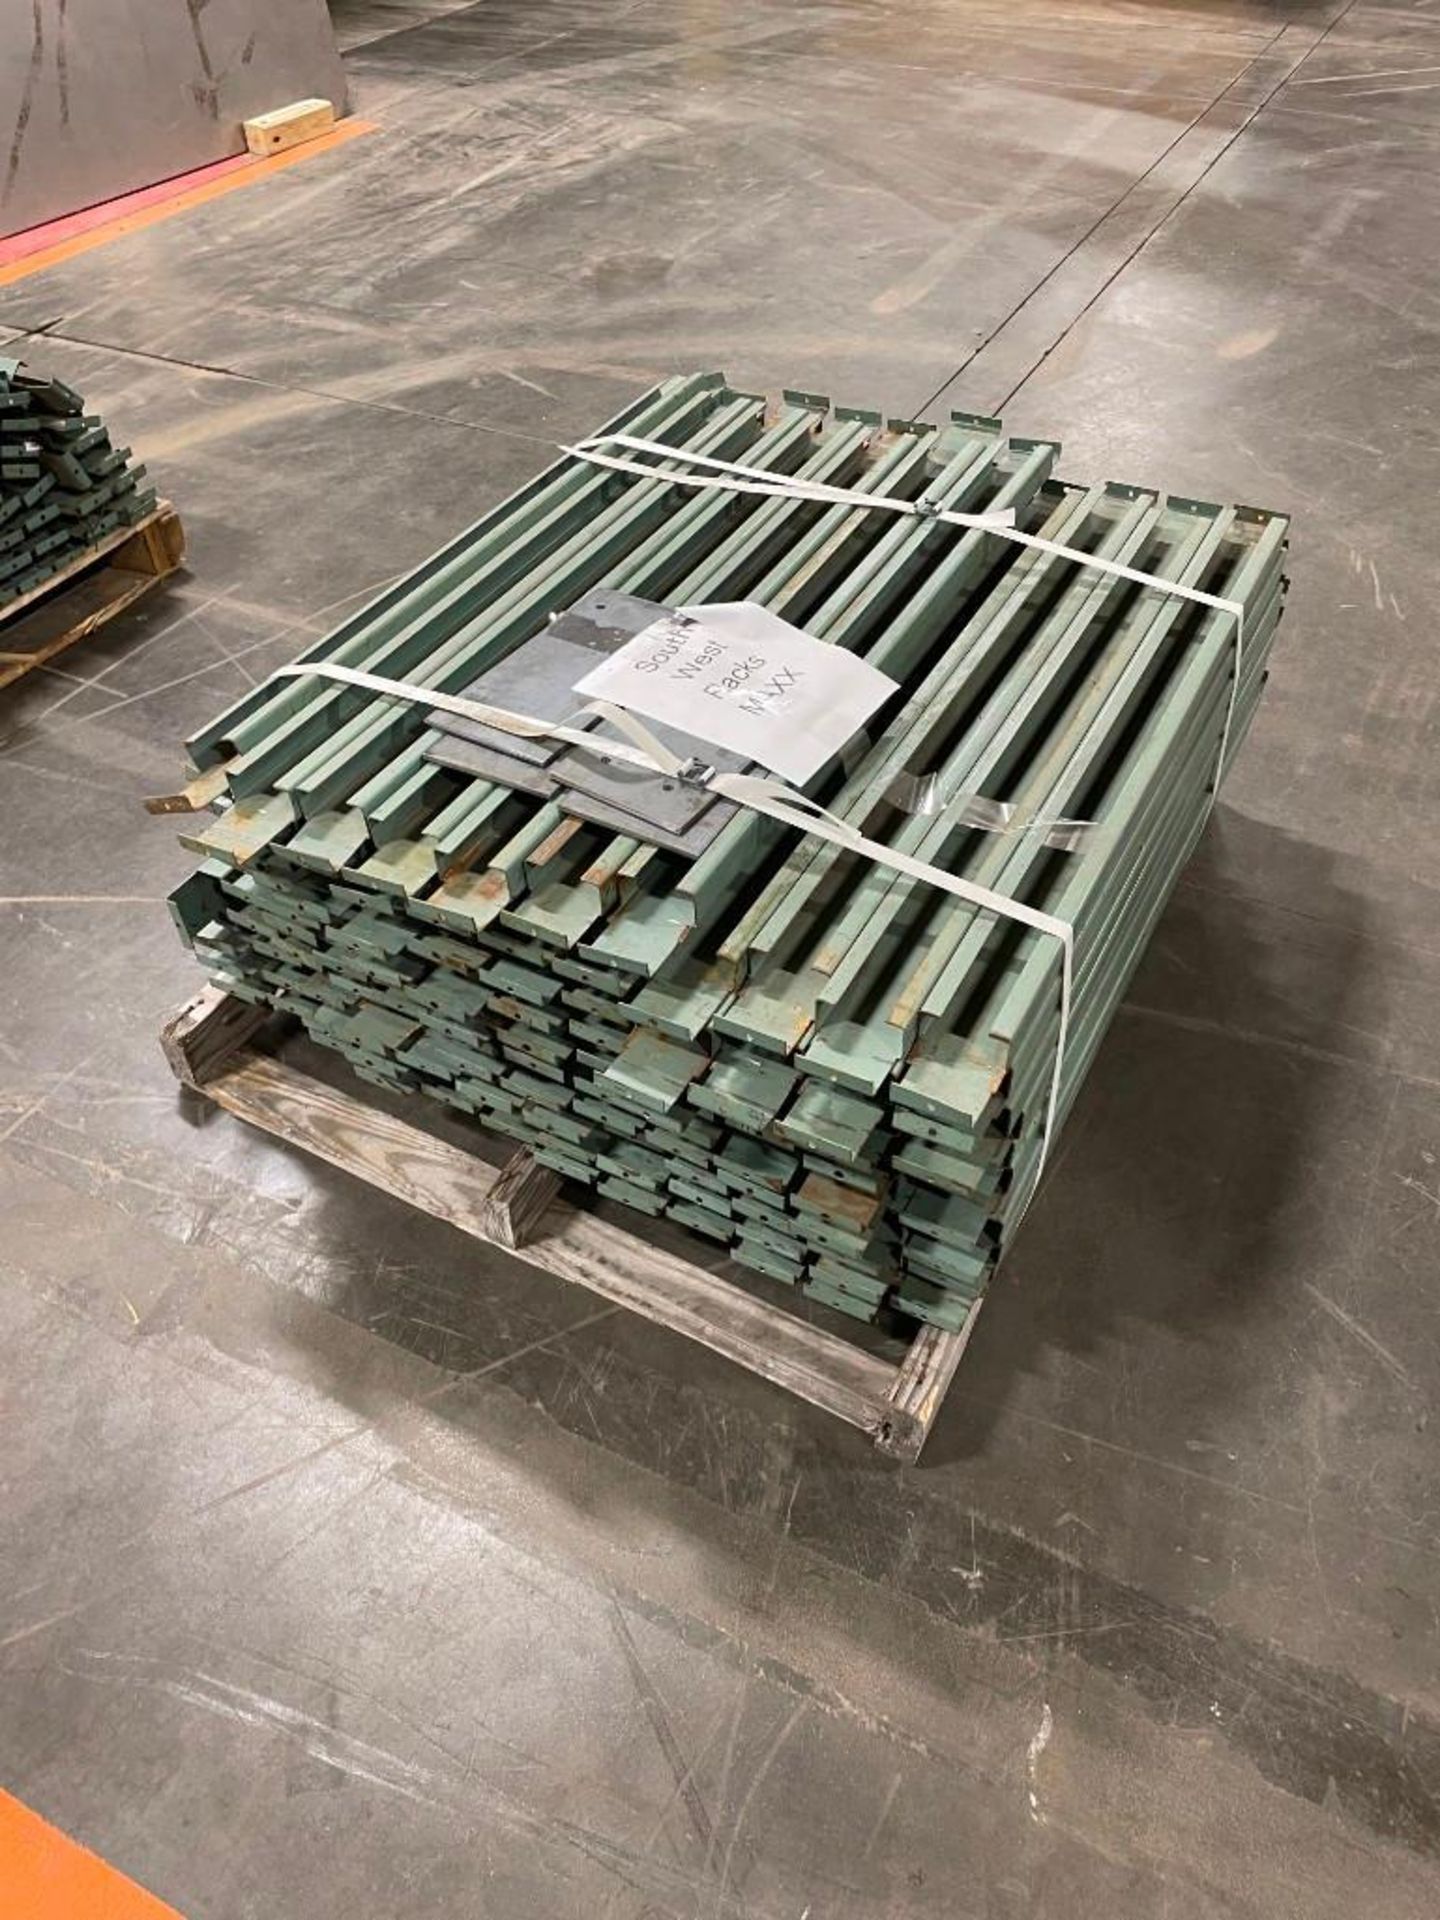 Lot of Pallet Racking, Cross beam supports 44" long